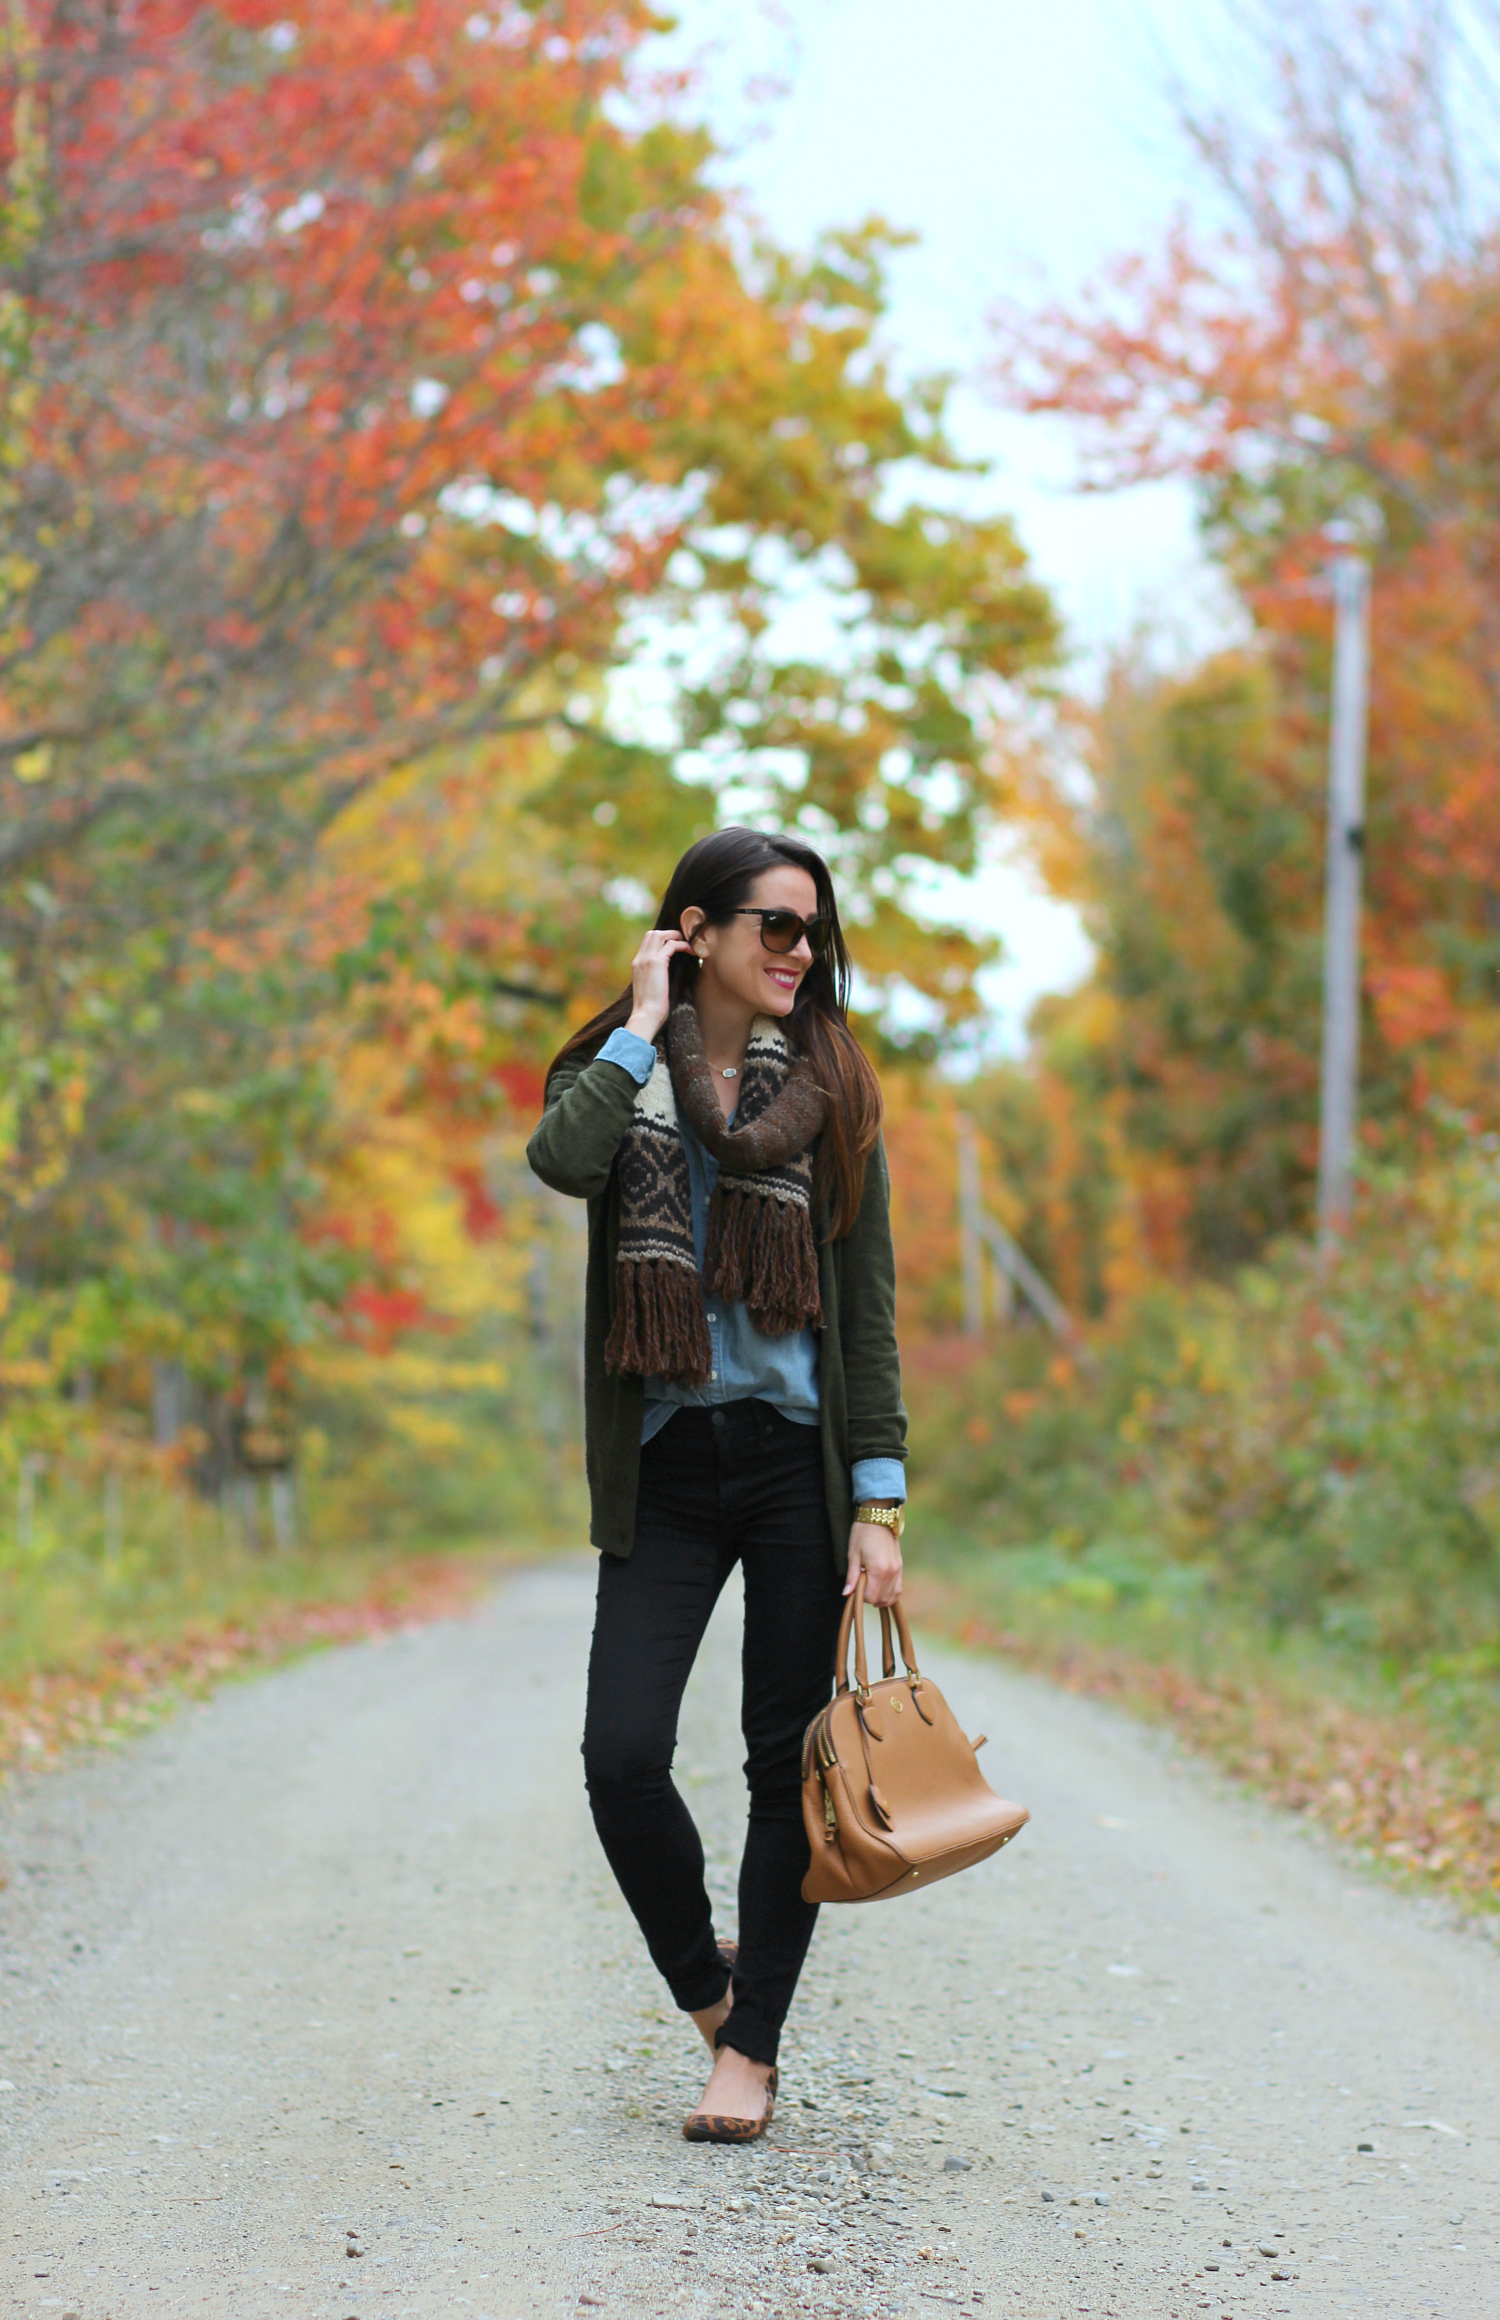 The perfect affordable olive cardigan sweater for chasing leaves in Maine